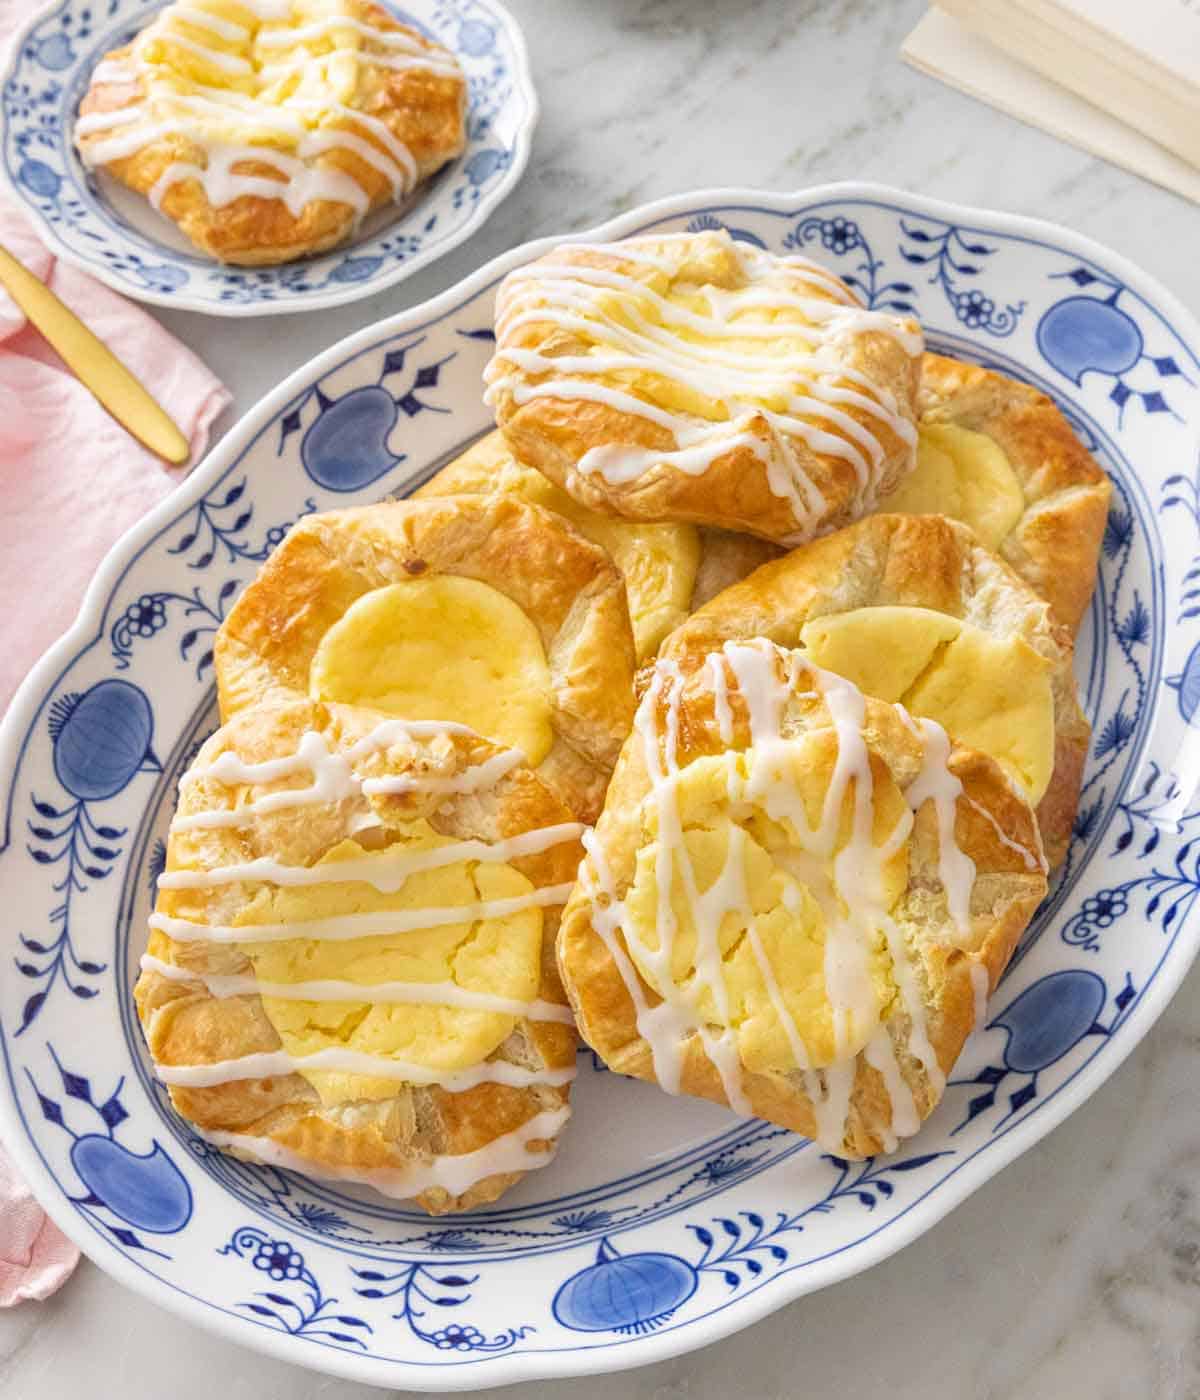 A platter of cheese danishes.